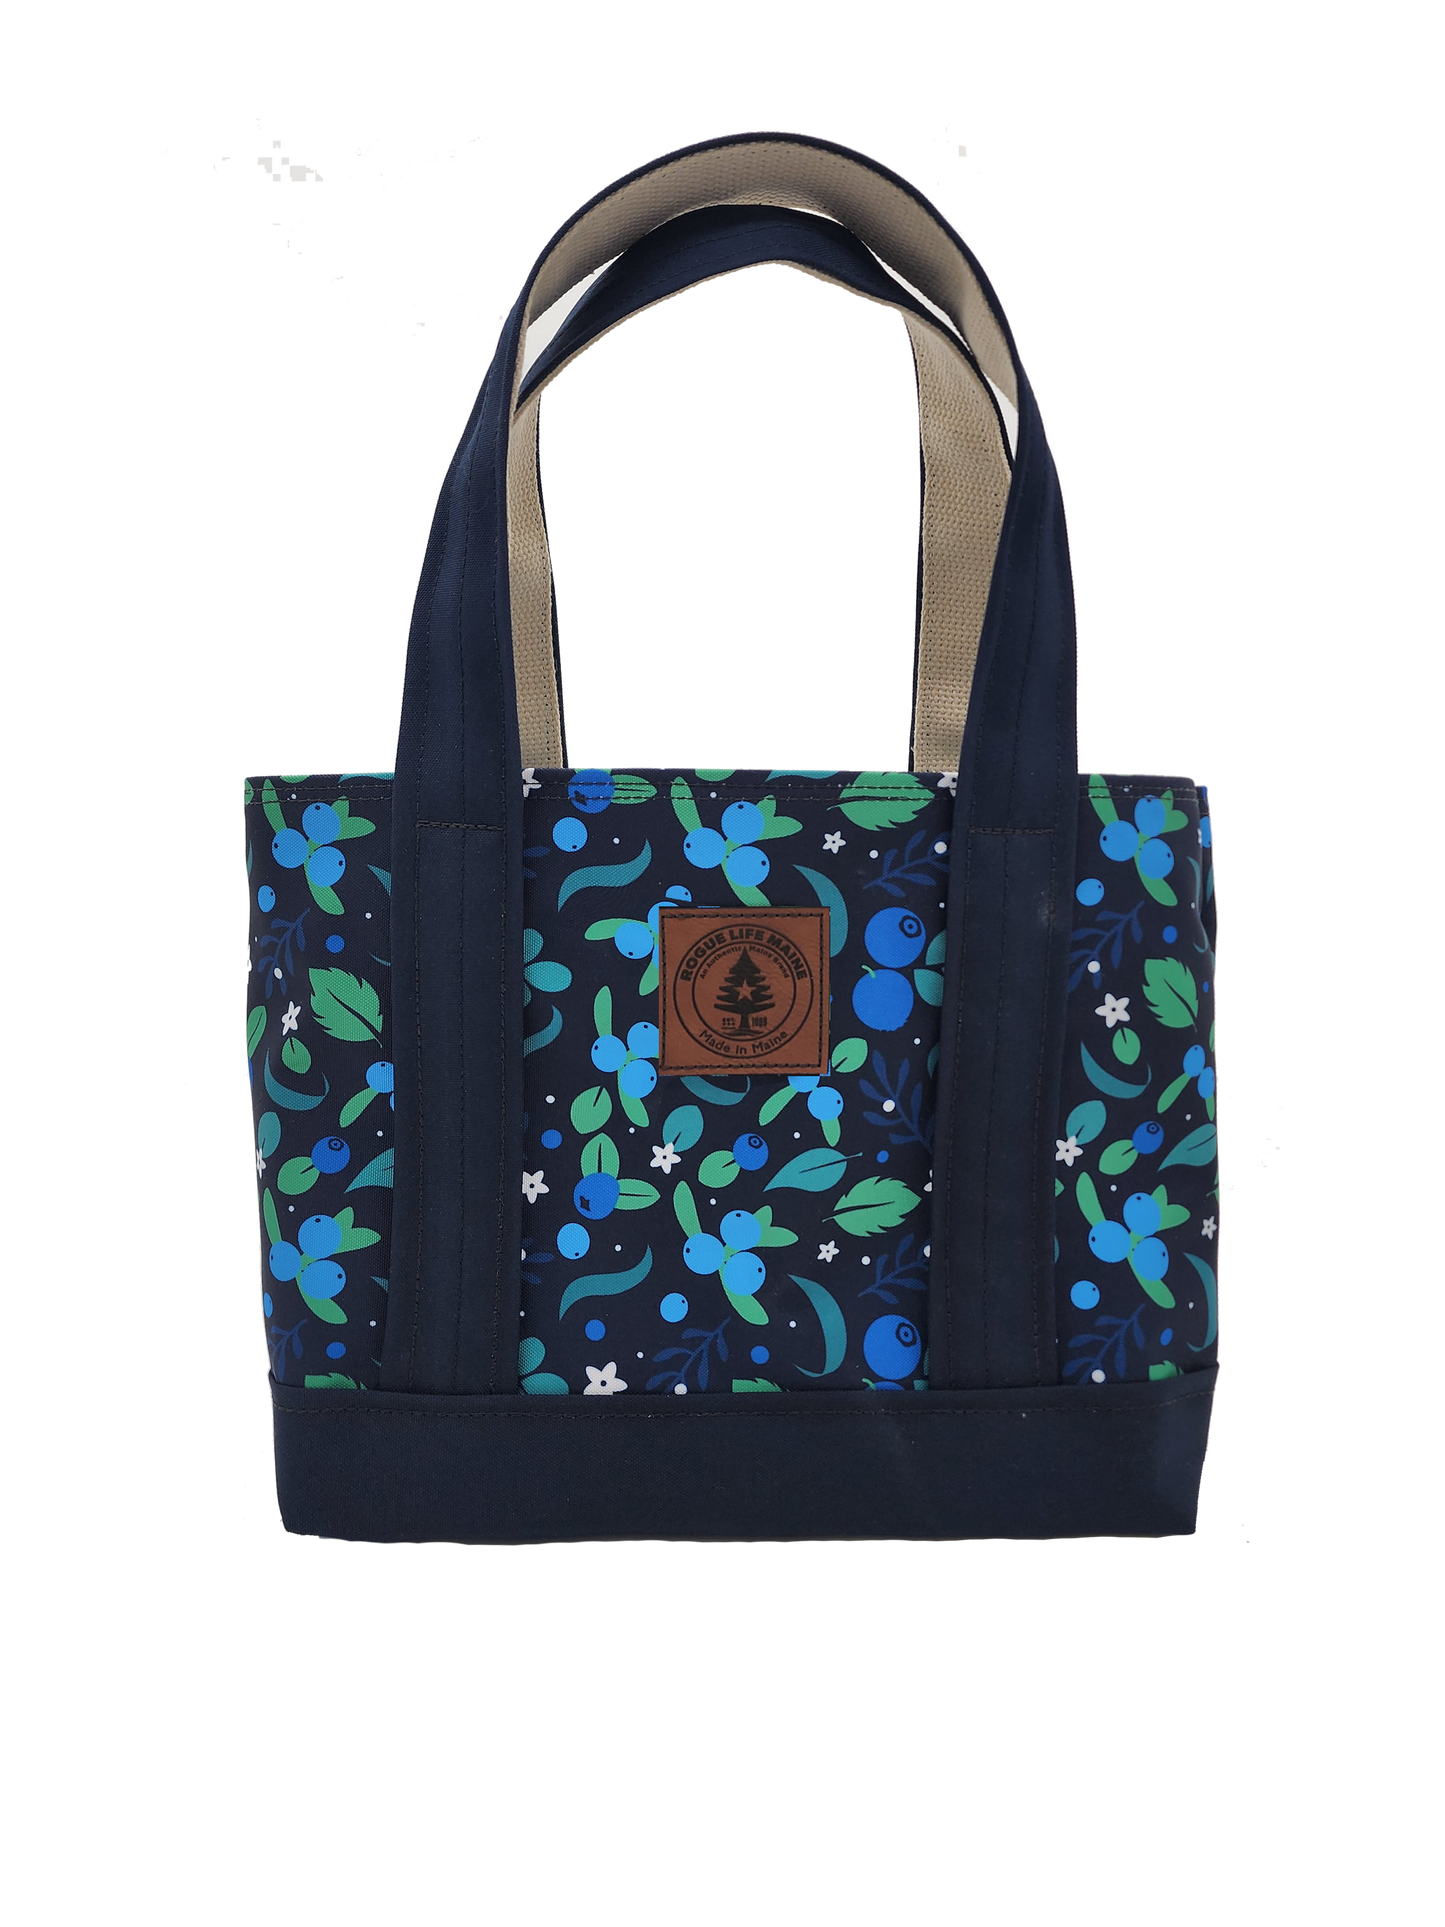 RLM "Blueberry Fields" Tote Bag